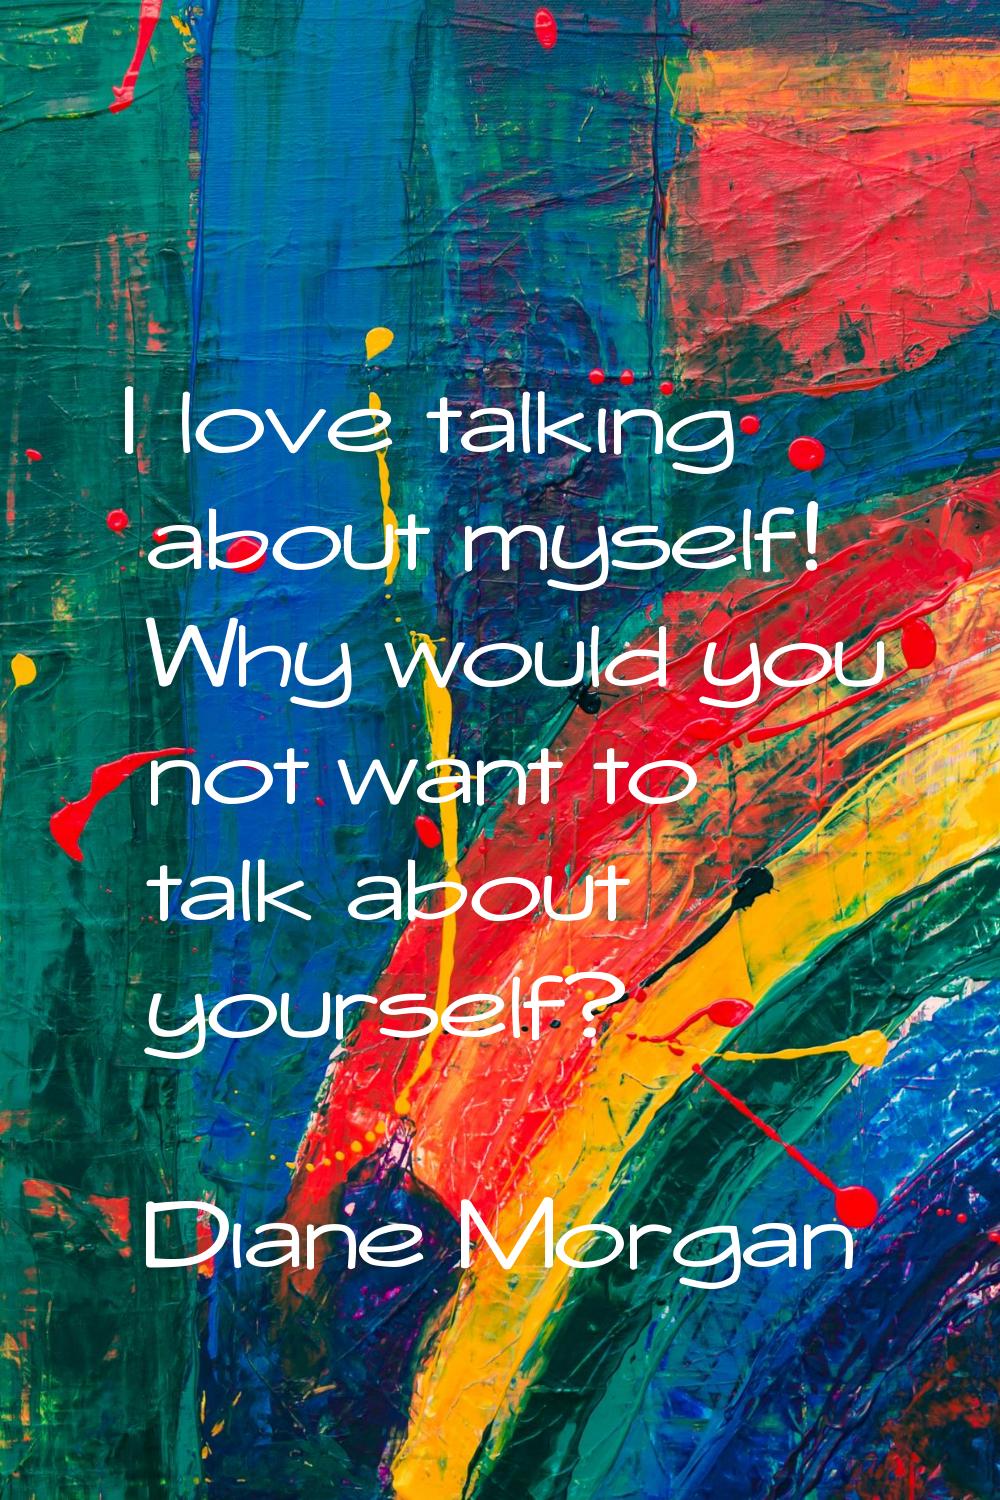 I love talking about myself! Why would you not want to talk about yourself?